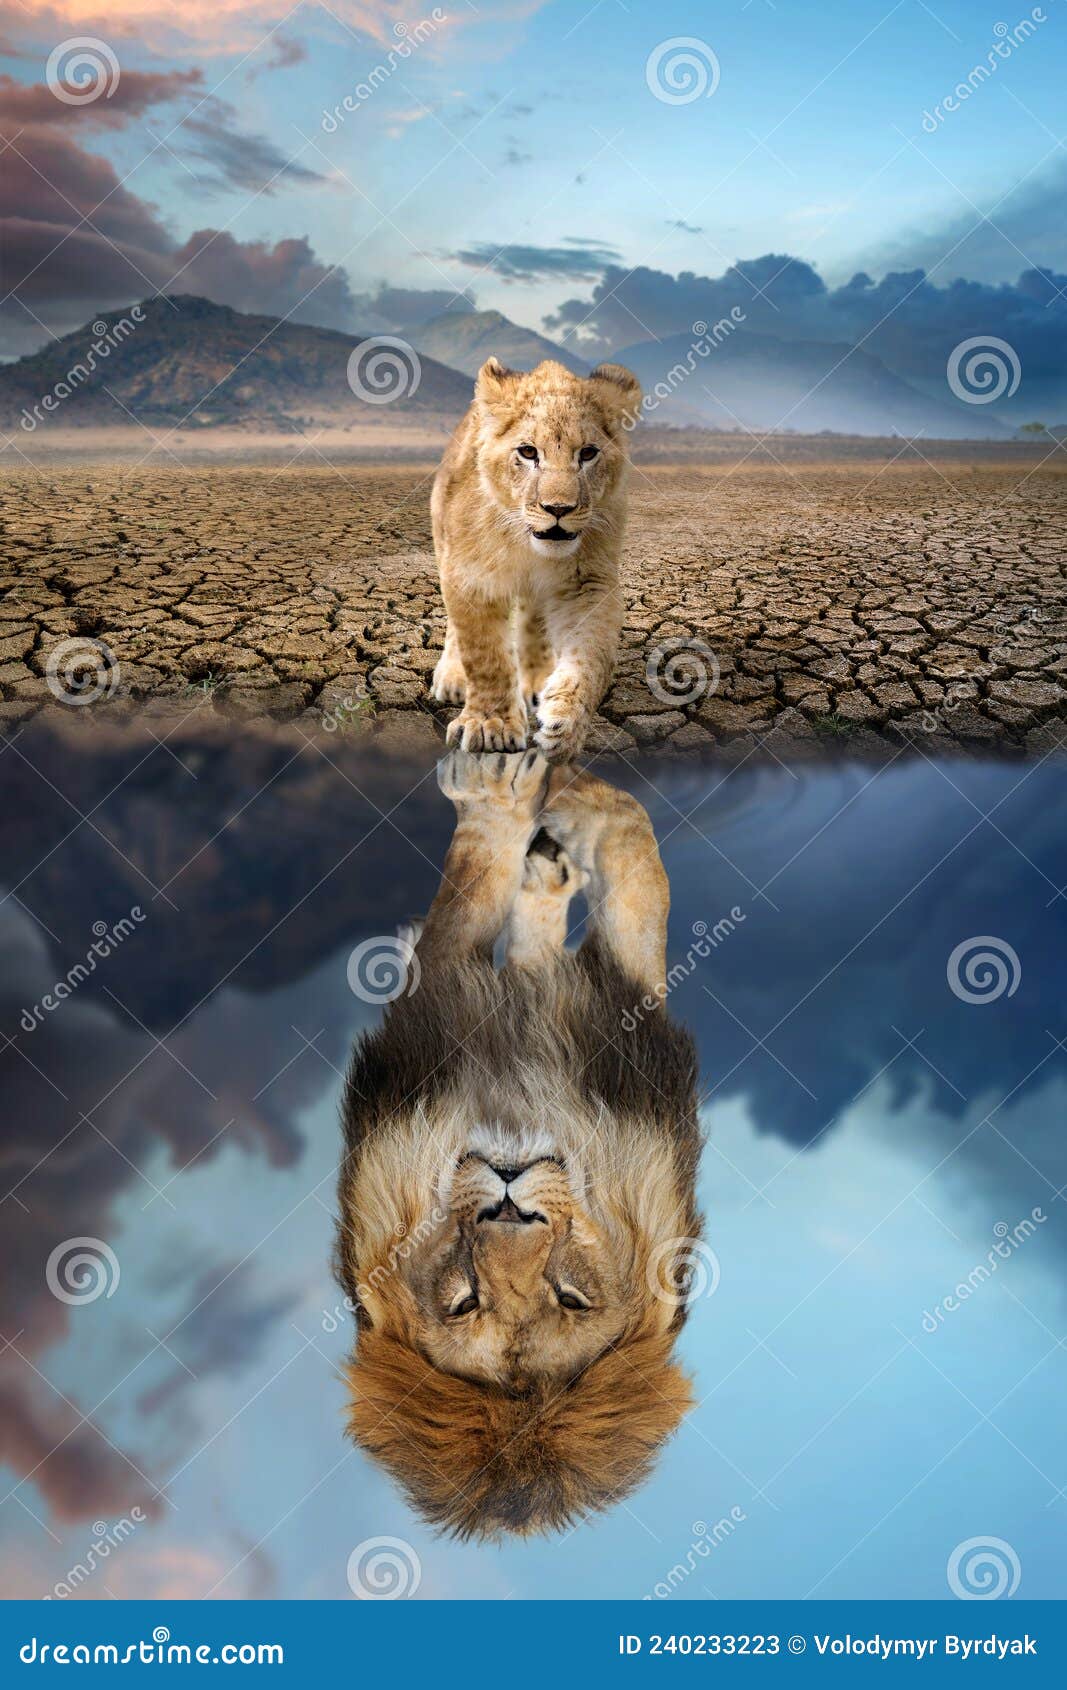 lion cub looking the reflection of an adult lion in the water